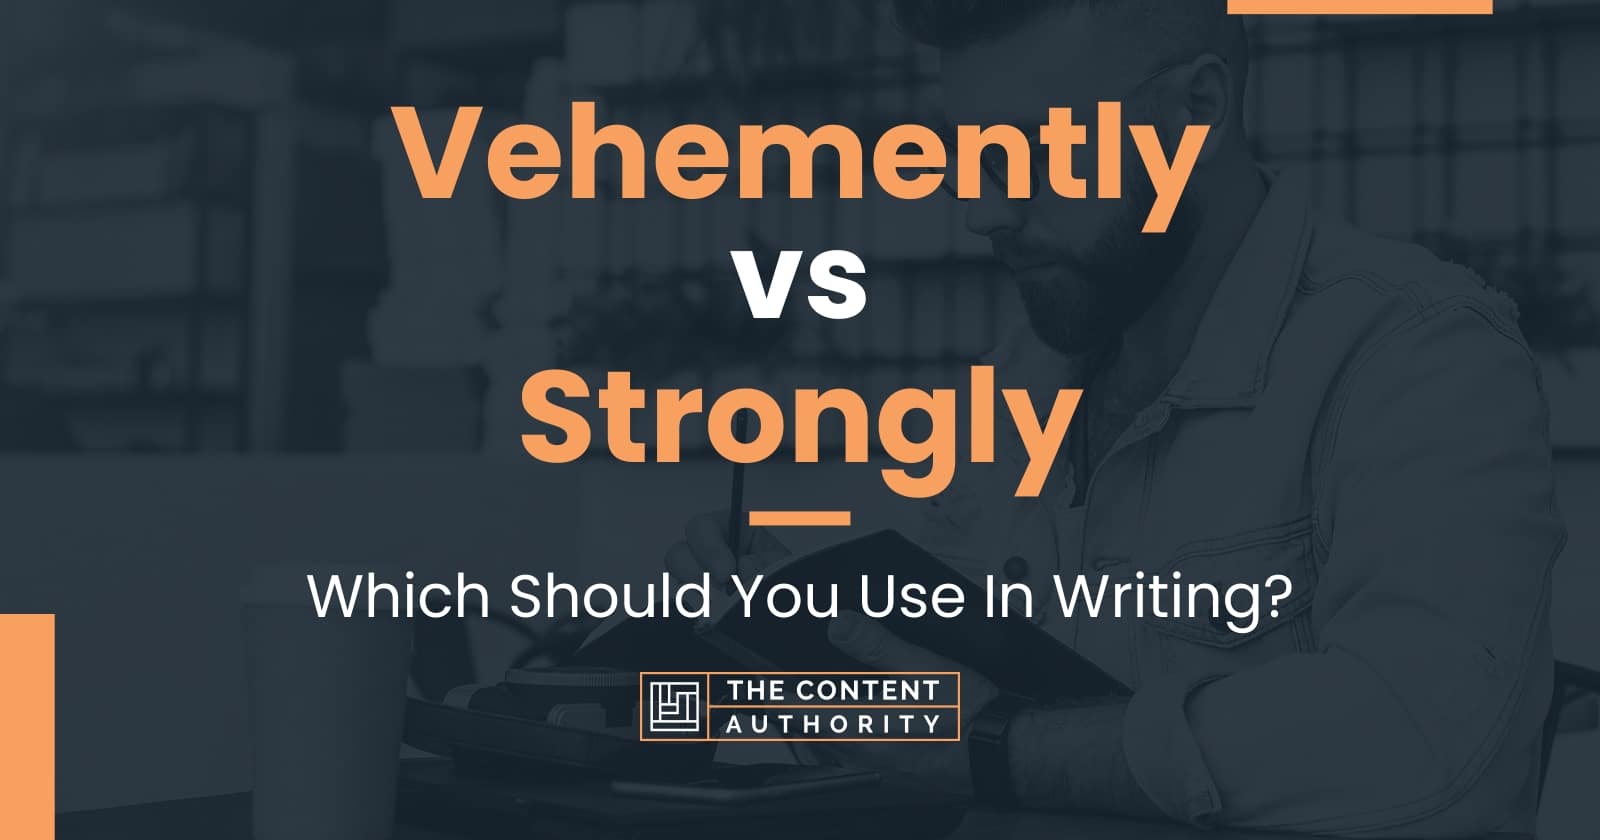 Vehemently vs Strongly: Which Should You Use In Writing?